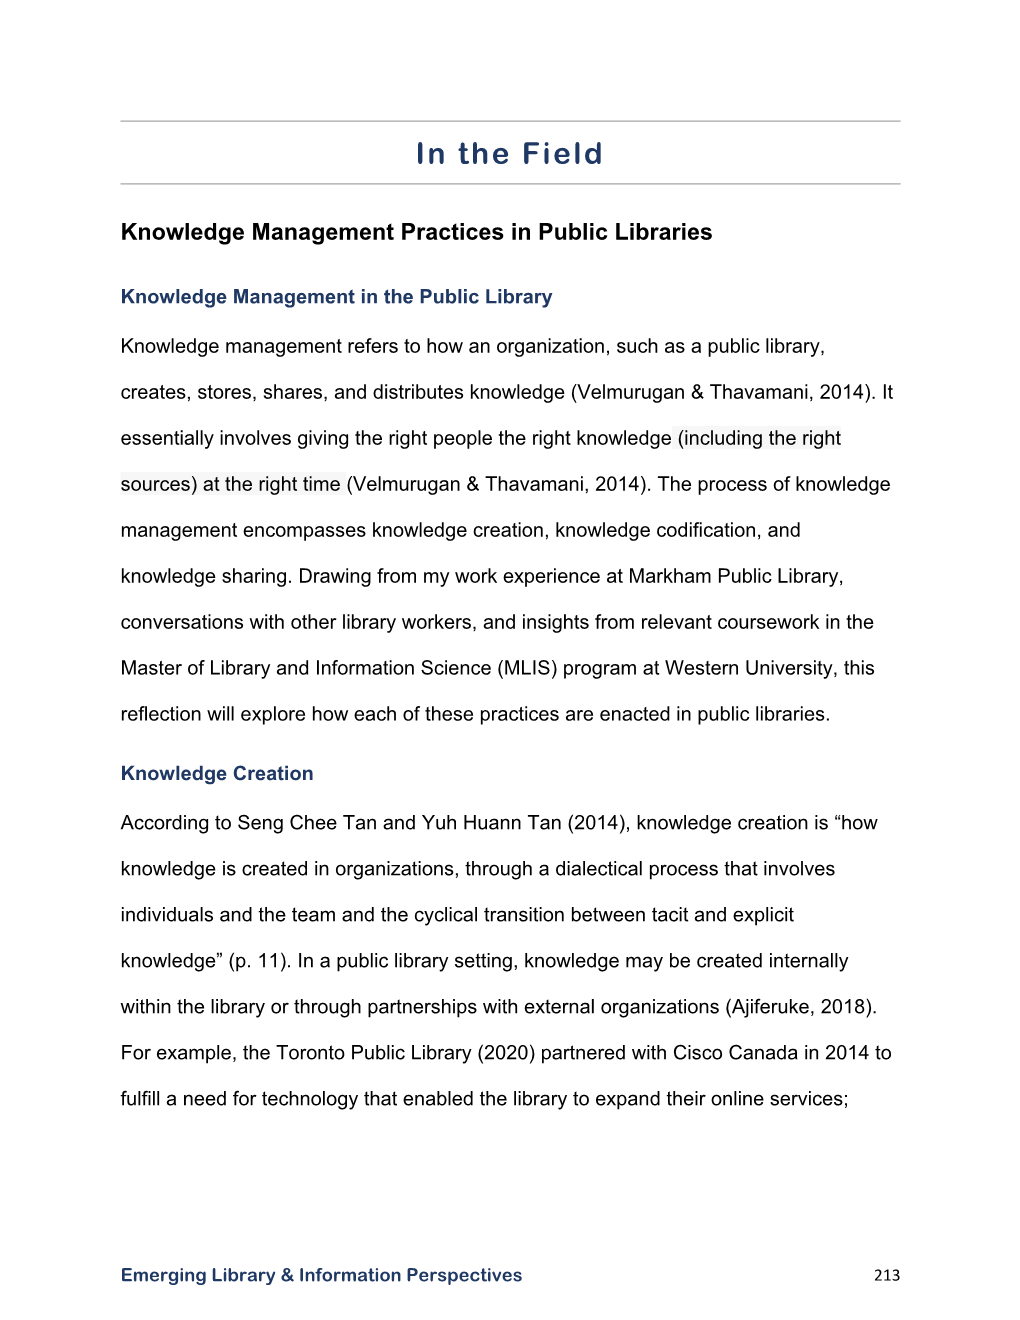 Knowledge Management Practices in Public Libraries